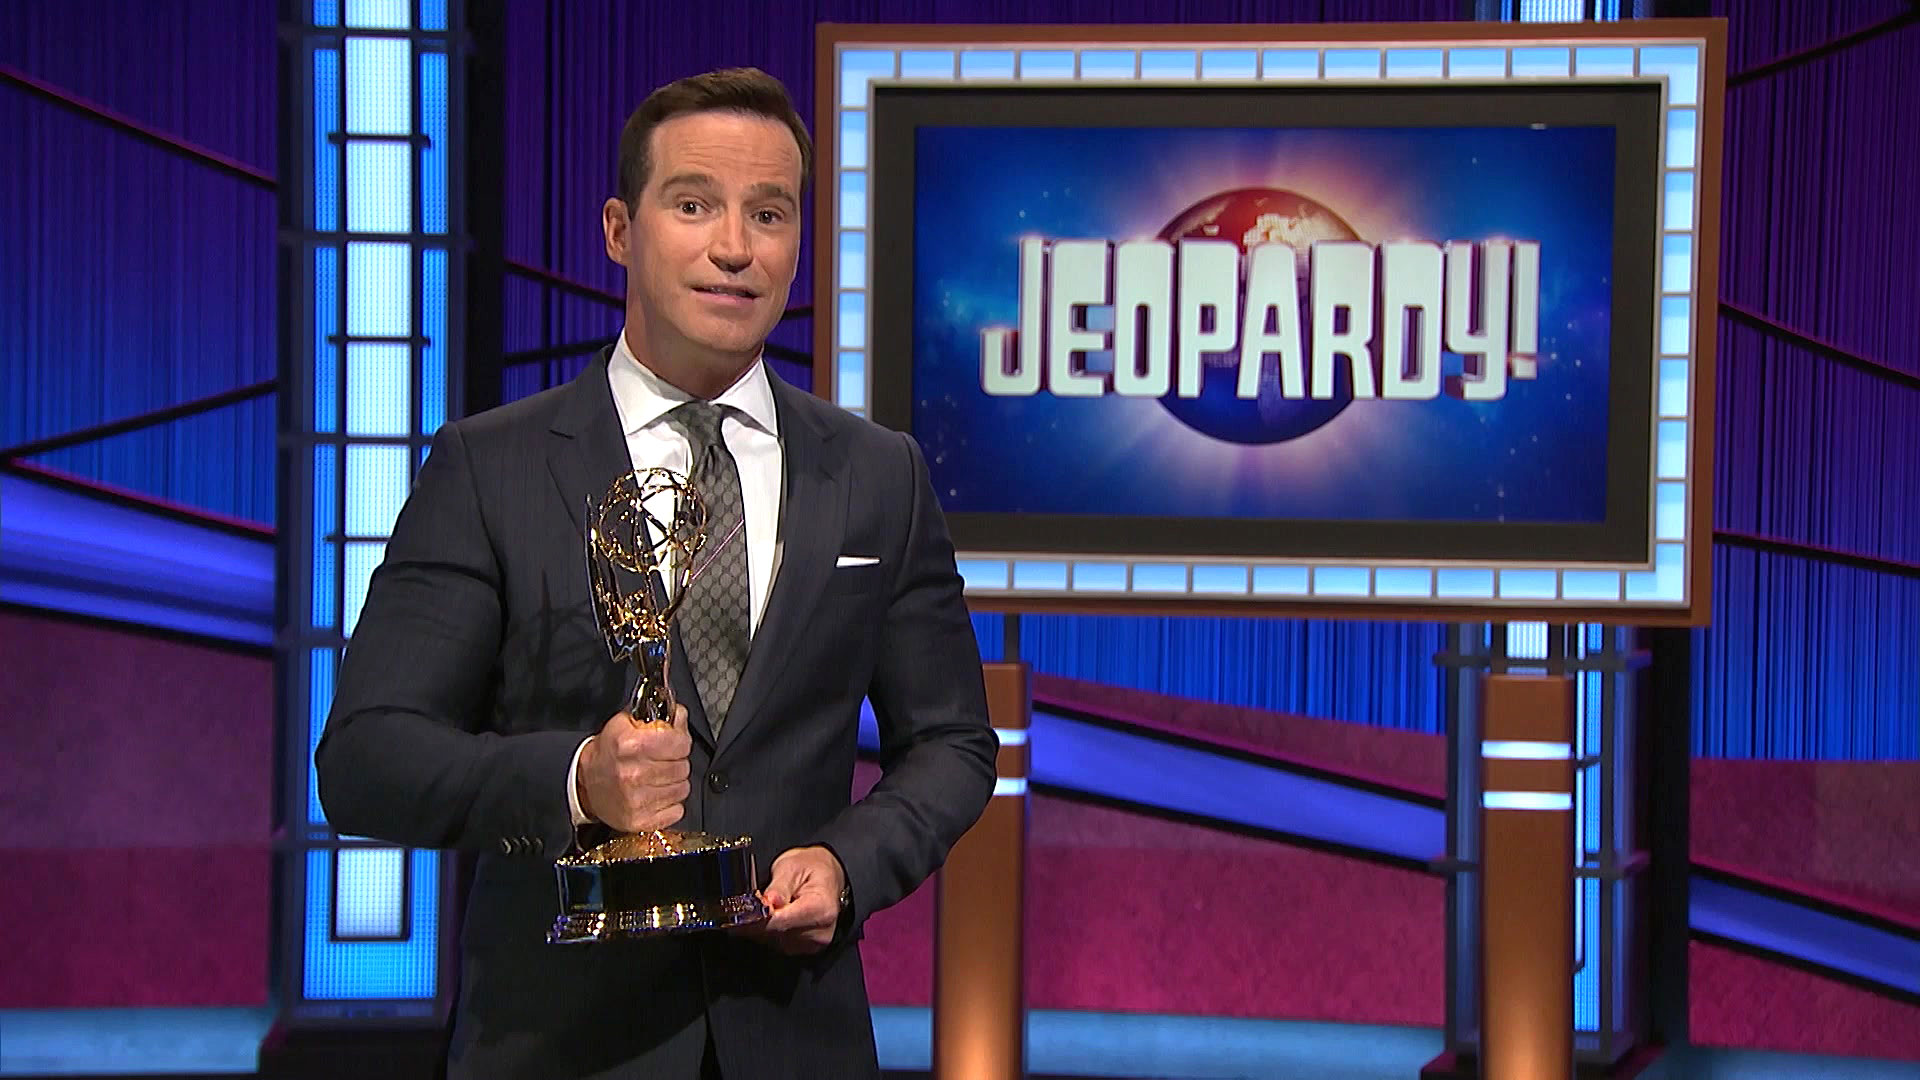 Tie breaker on 'Jeopardy!' Friday marks rare moment for show